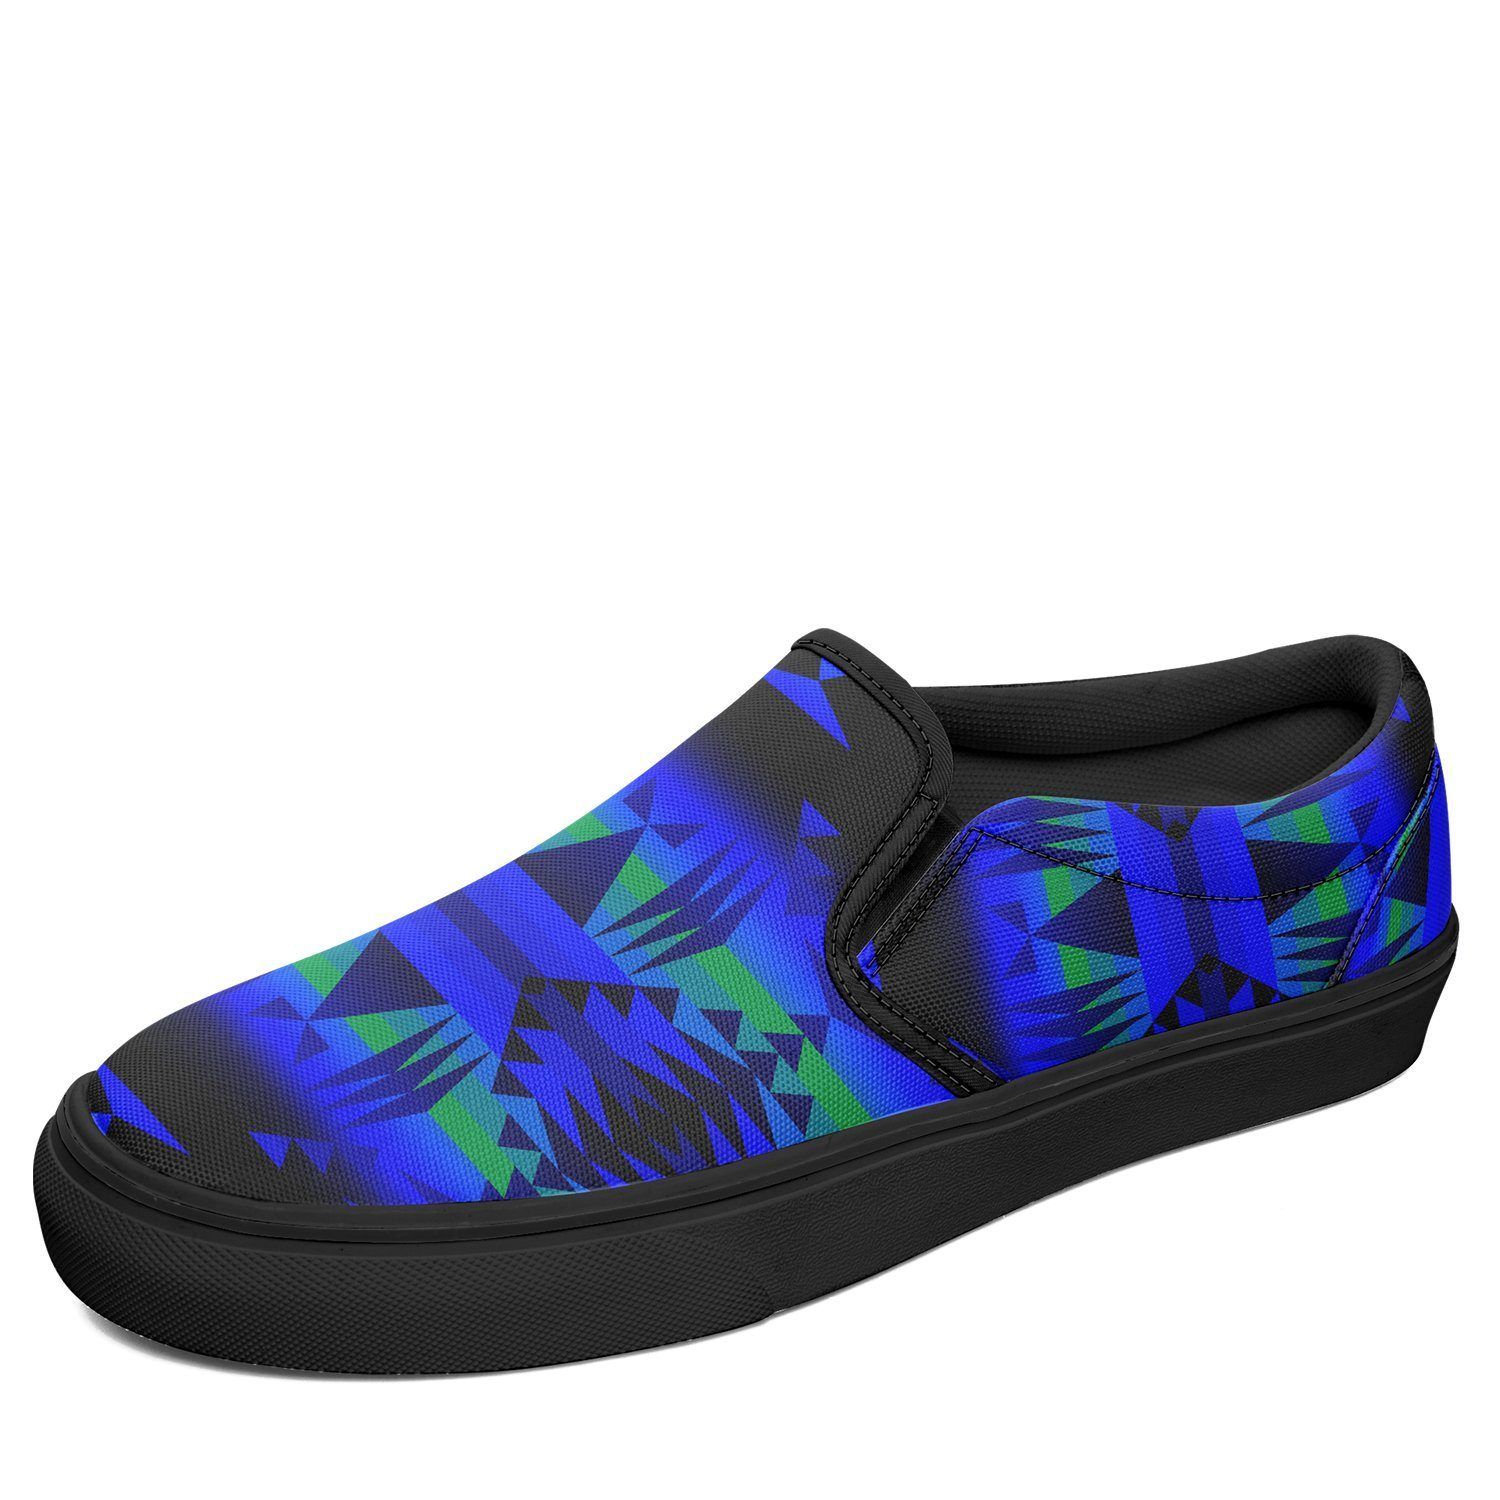 Between the Blue Ridge Mountains Otoyimm Kid's Canvas Slip On Shoes 49 Dzine US Youth 1 / EUR 32 Black Sole 